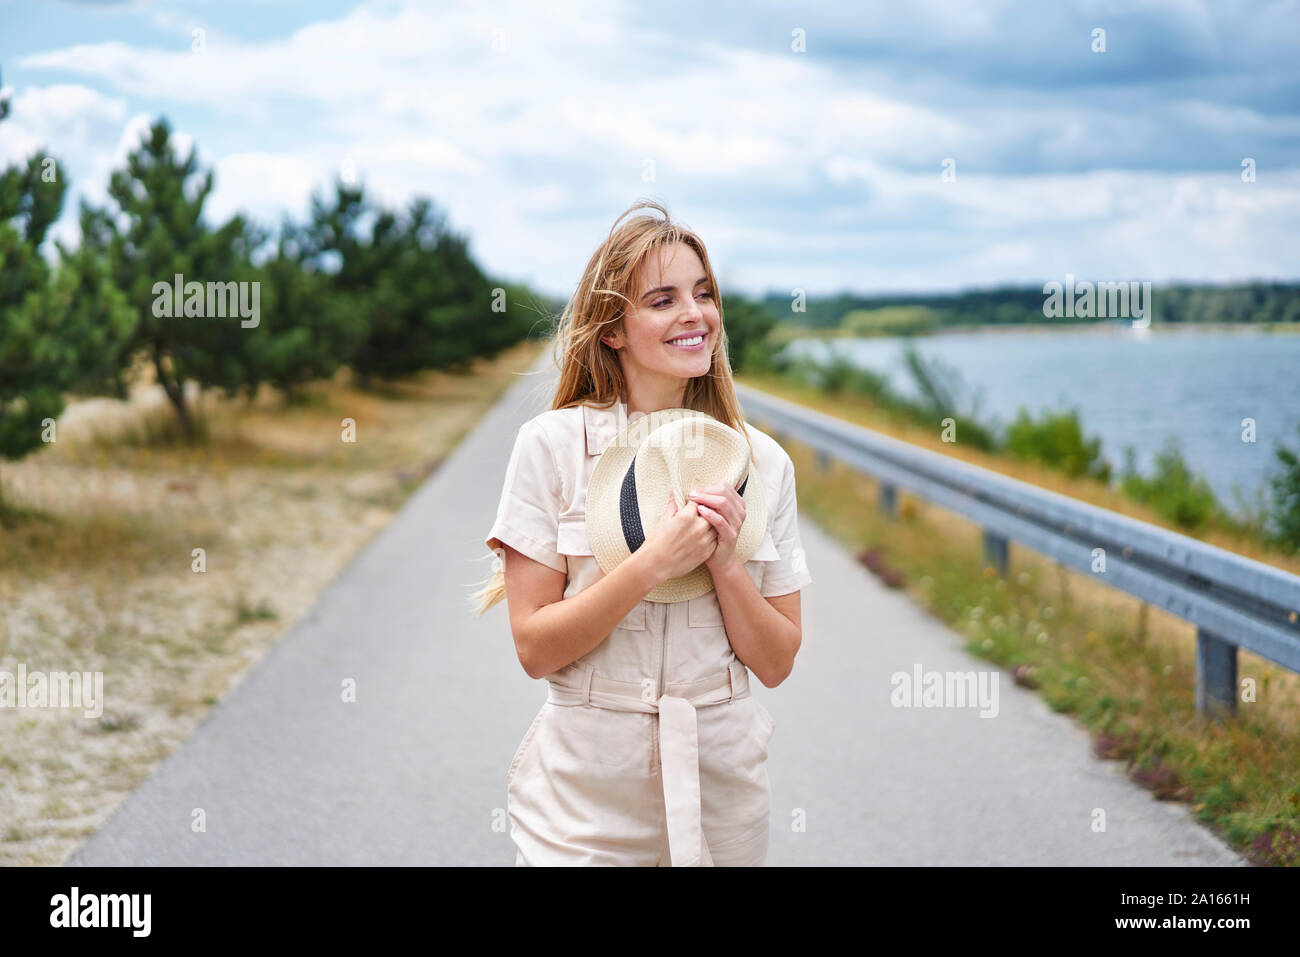 Smiling woman holding hat on rural road at the lakeside Stock Photo